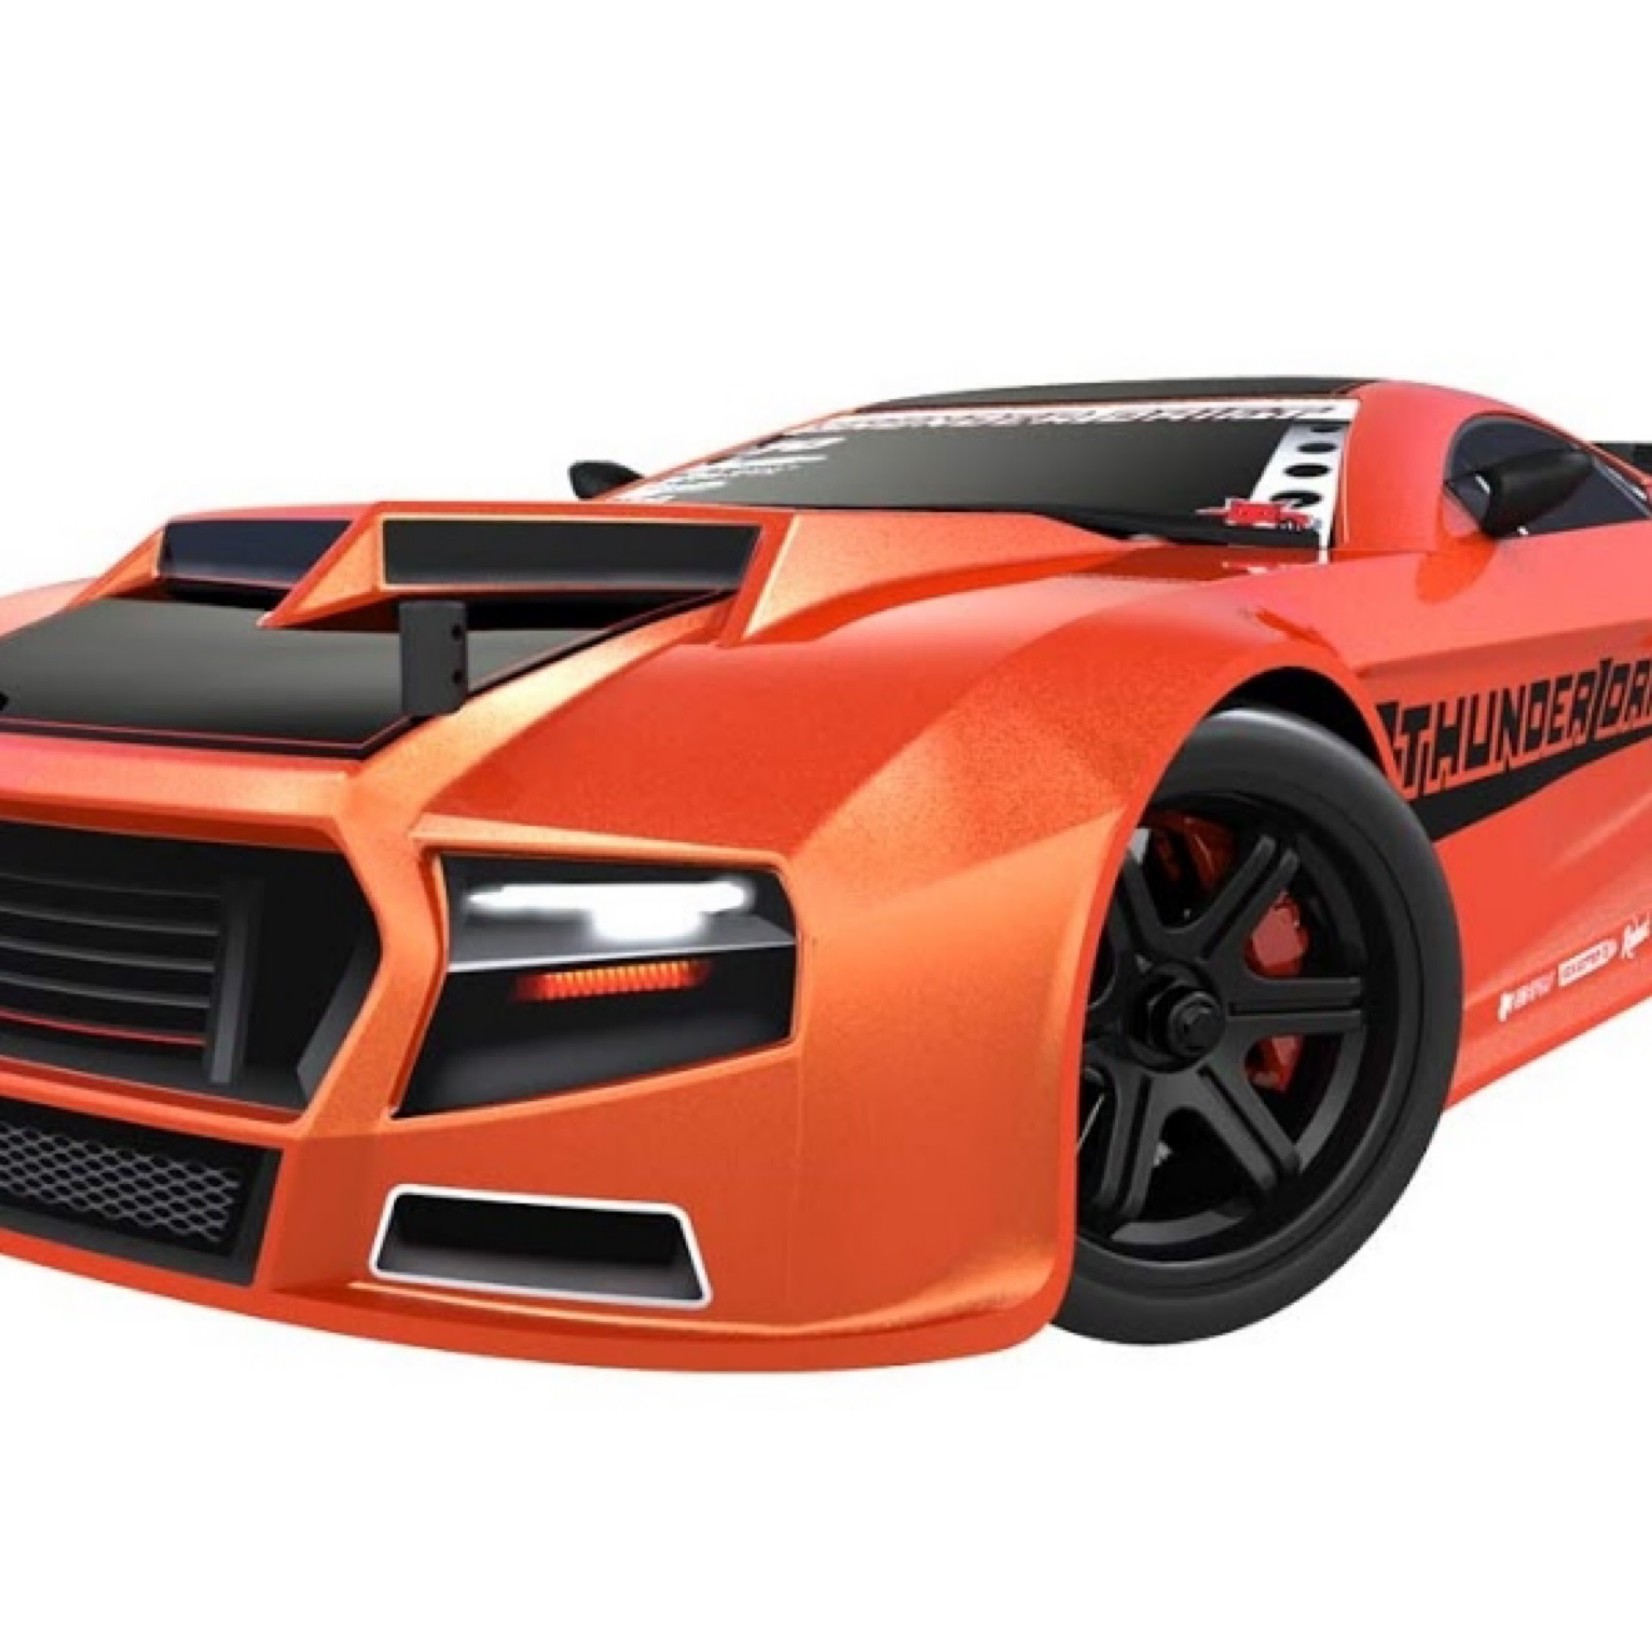 Redcat Racing RedCat Racing 1/10 scale Electric Powered Ready-to-Run Thunder Drift Car(Met Orange) w/7.2v 2000mAh NiMH battery, charger & 2.4GHz radio #RER08010